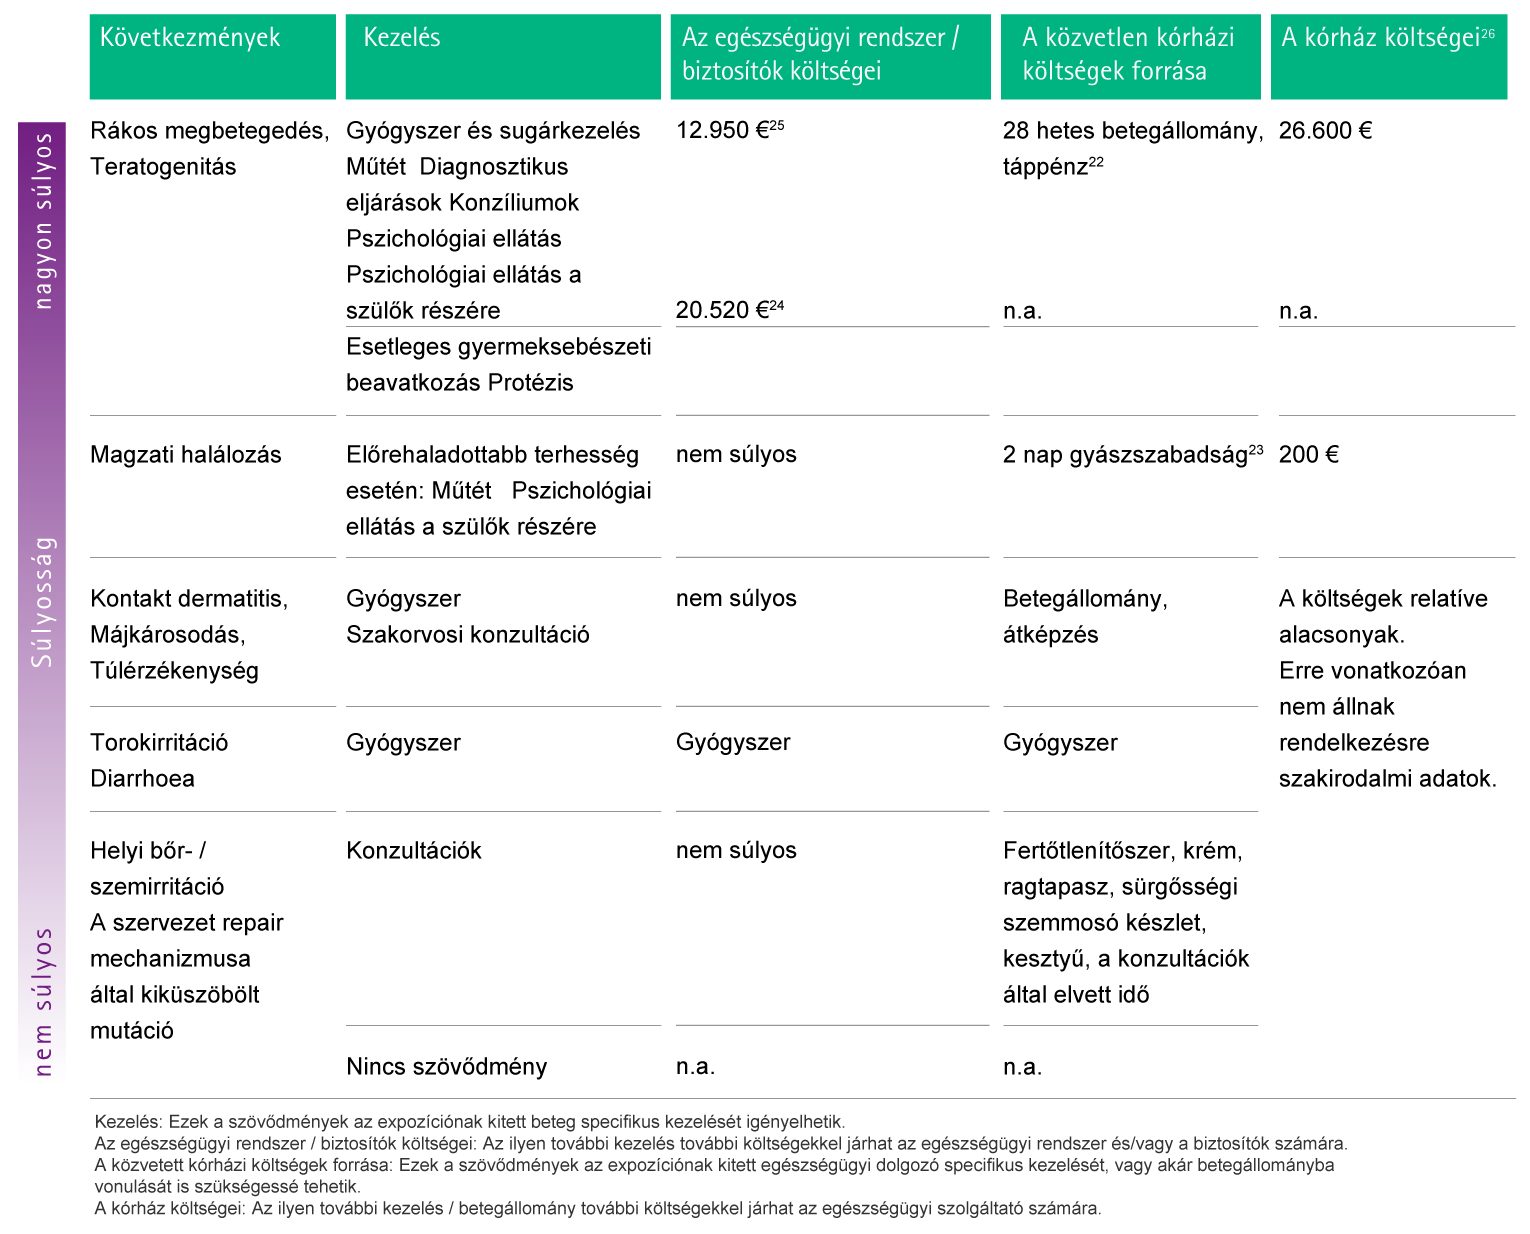 Table with estimations of possible additional costs as a consequence of complications caused by chemical contamination.